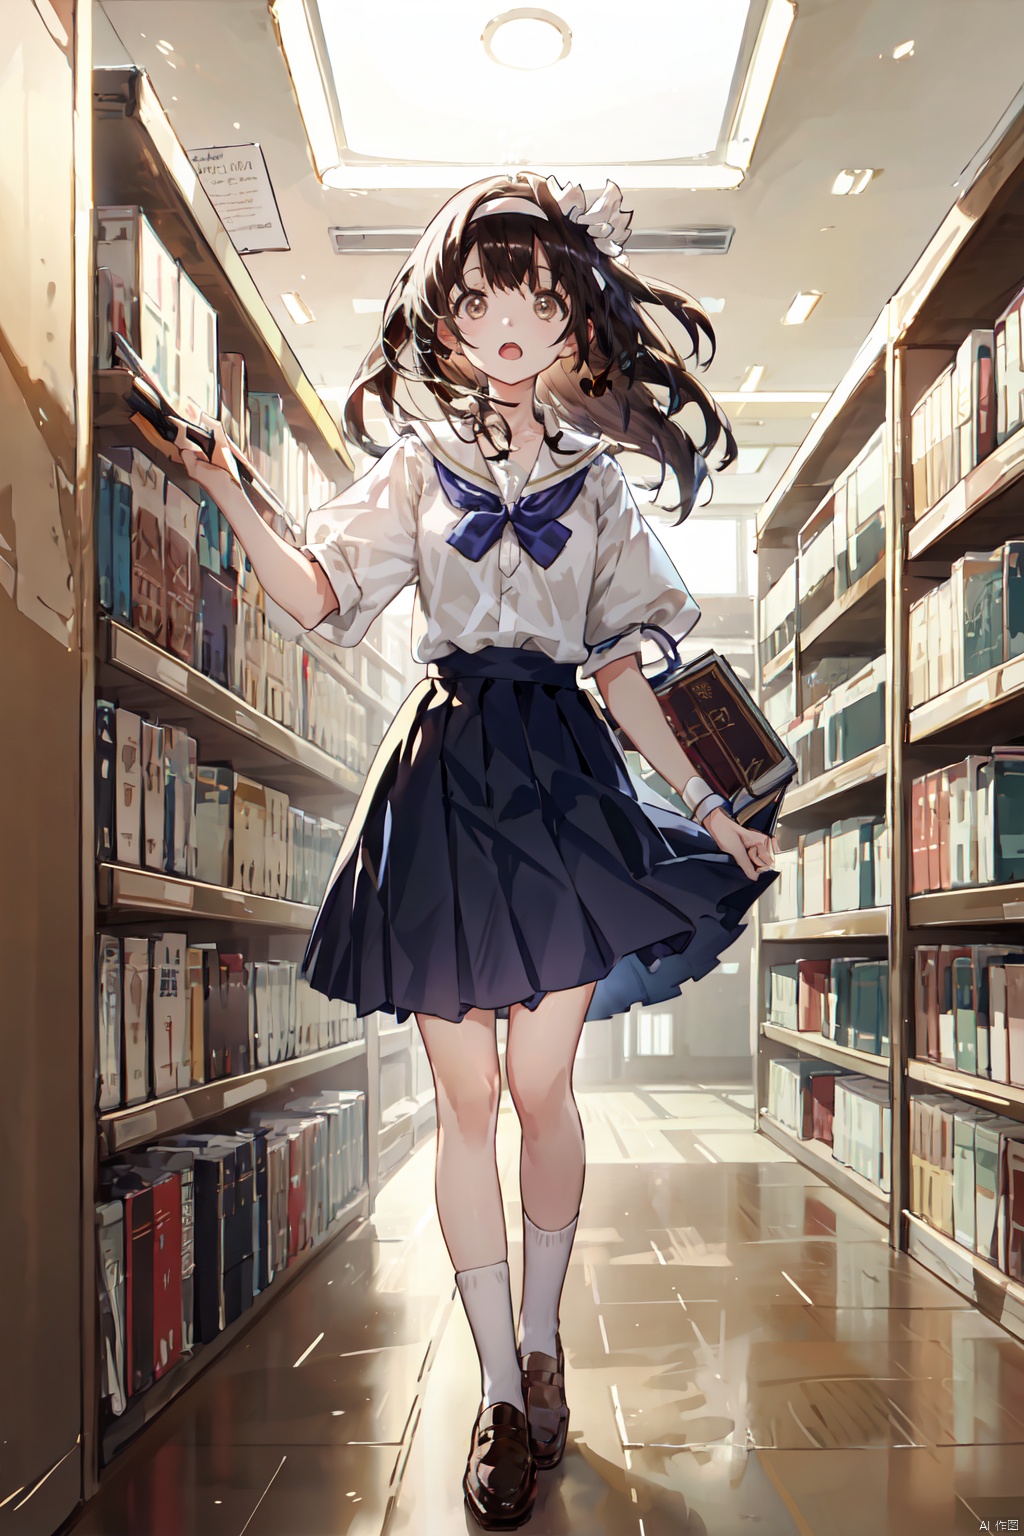  1girl, chitanda_eru (hyouka), solo, long_hair, looking_at_viewer, curious, open_mouth, hairband, uniform, brown_eyes, holding, black_hair, standing, full_body, book, ribbon, beige_uniform, white_hairband, white_ribbon, holding_book, mystery, club, school, library, shelves, books, oreki, school_style, collar, bow, skirt, brown_shoes, black_hairband